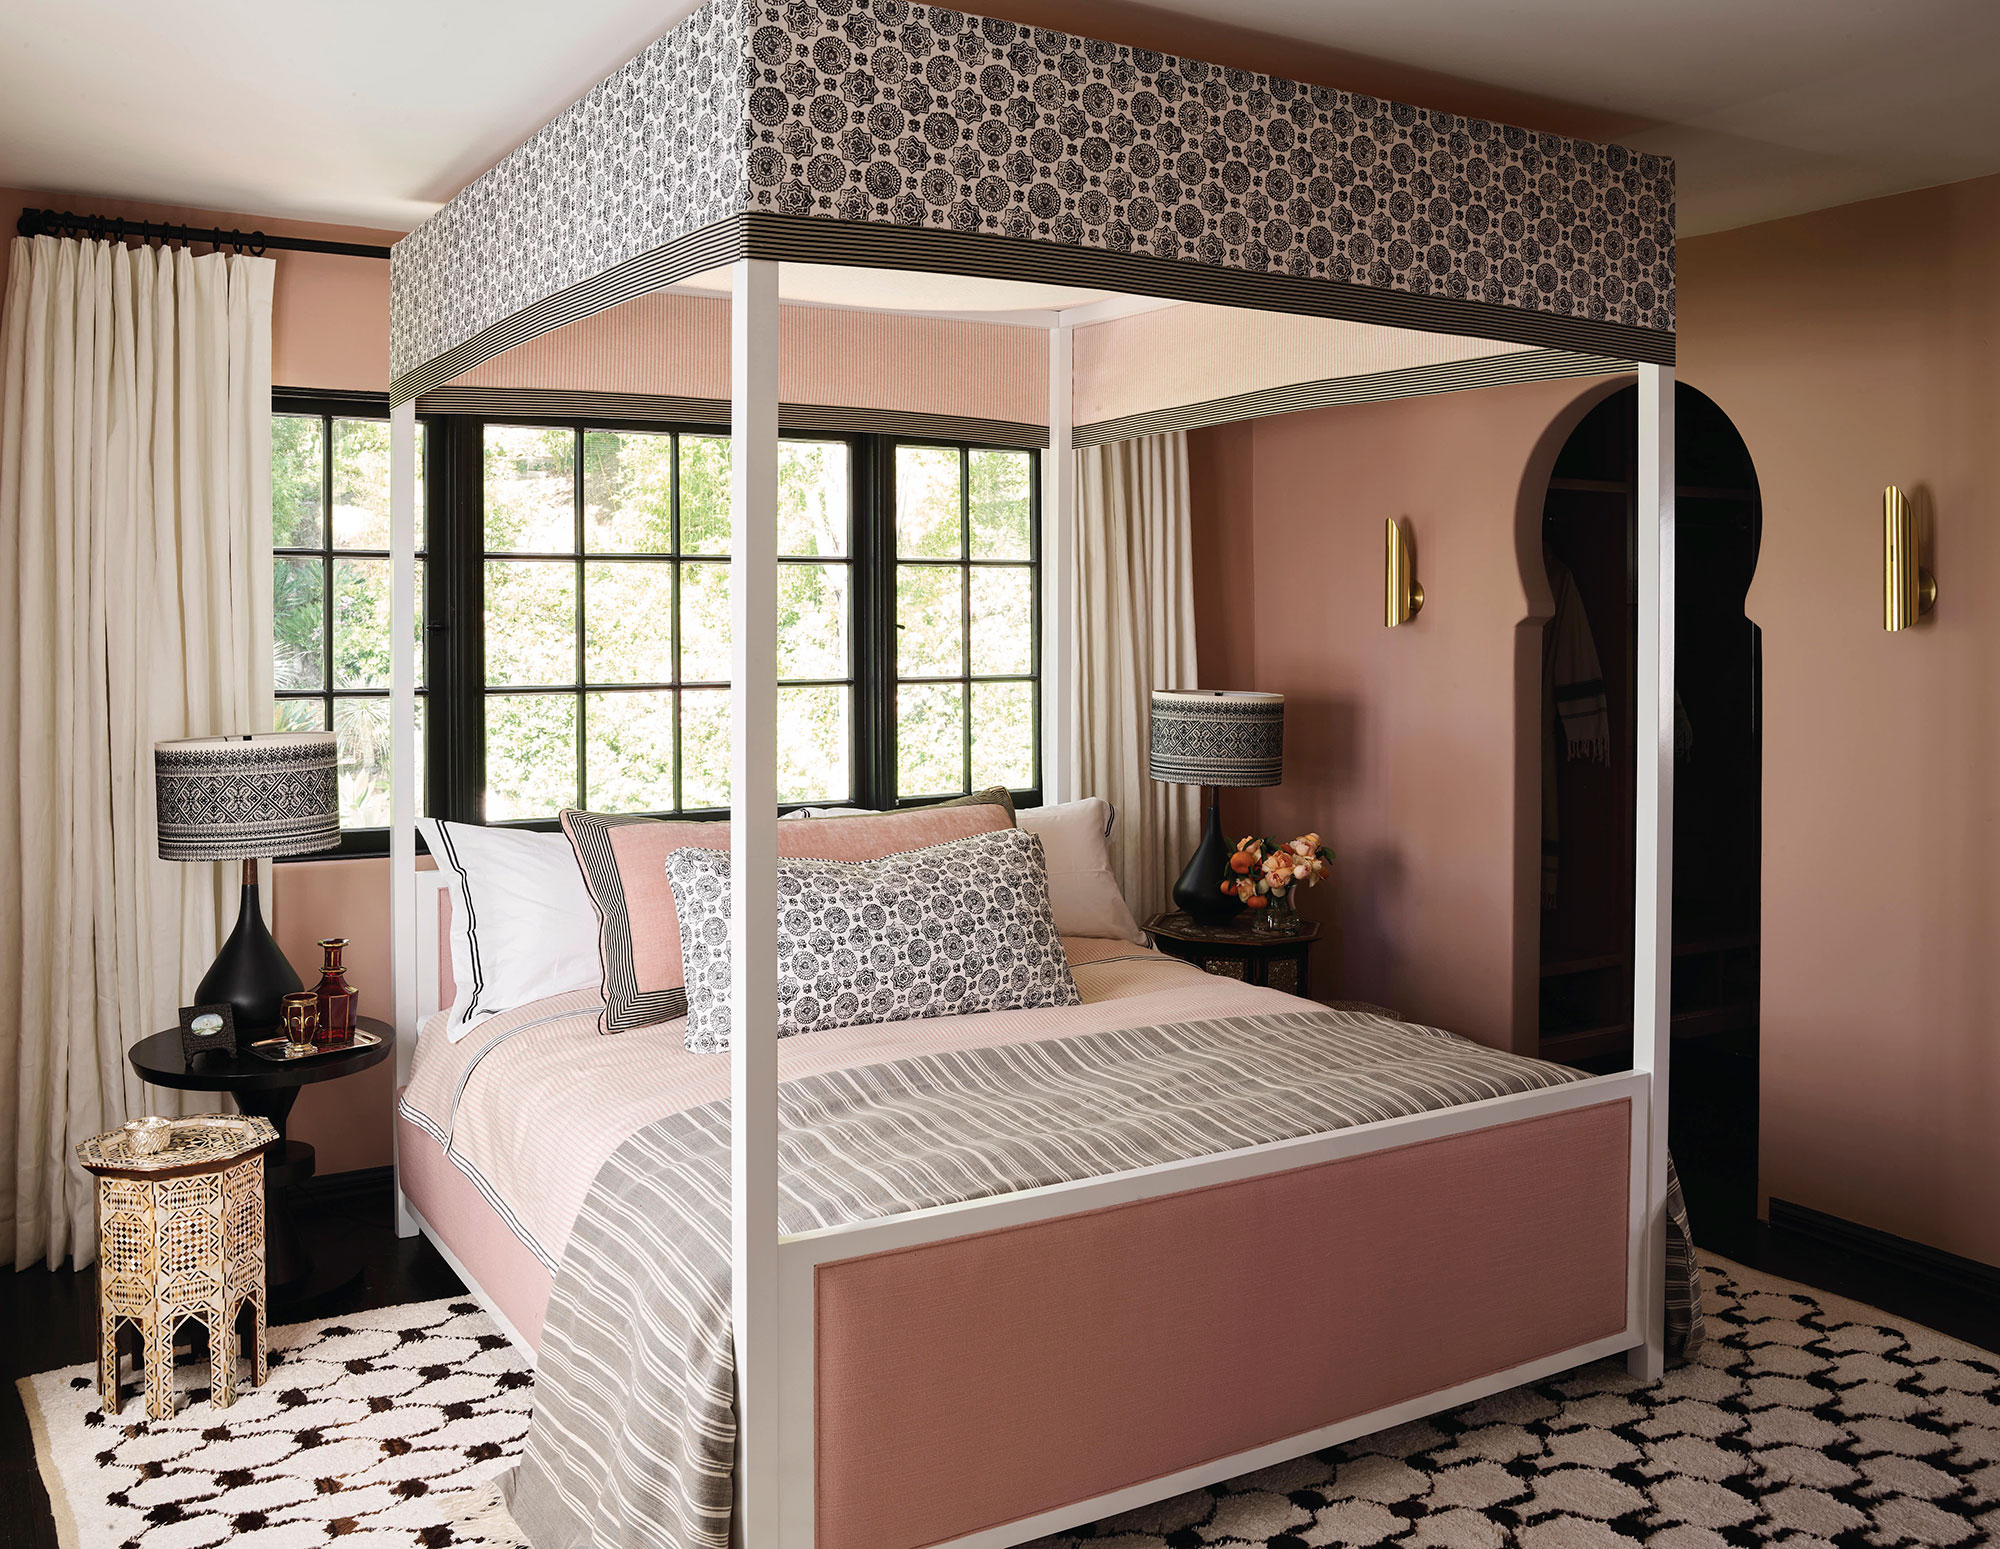 A pink bedroom with a gray-and-white canopy bed and a black-and-white rug.